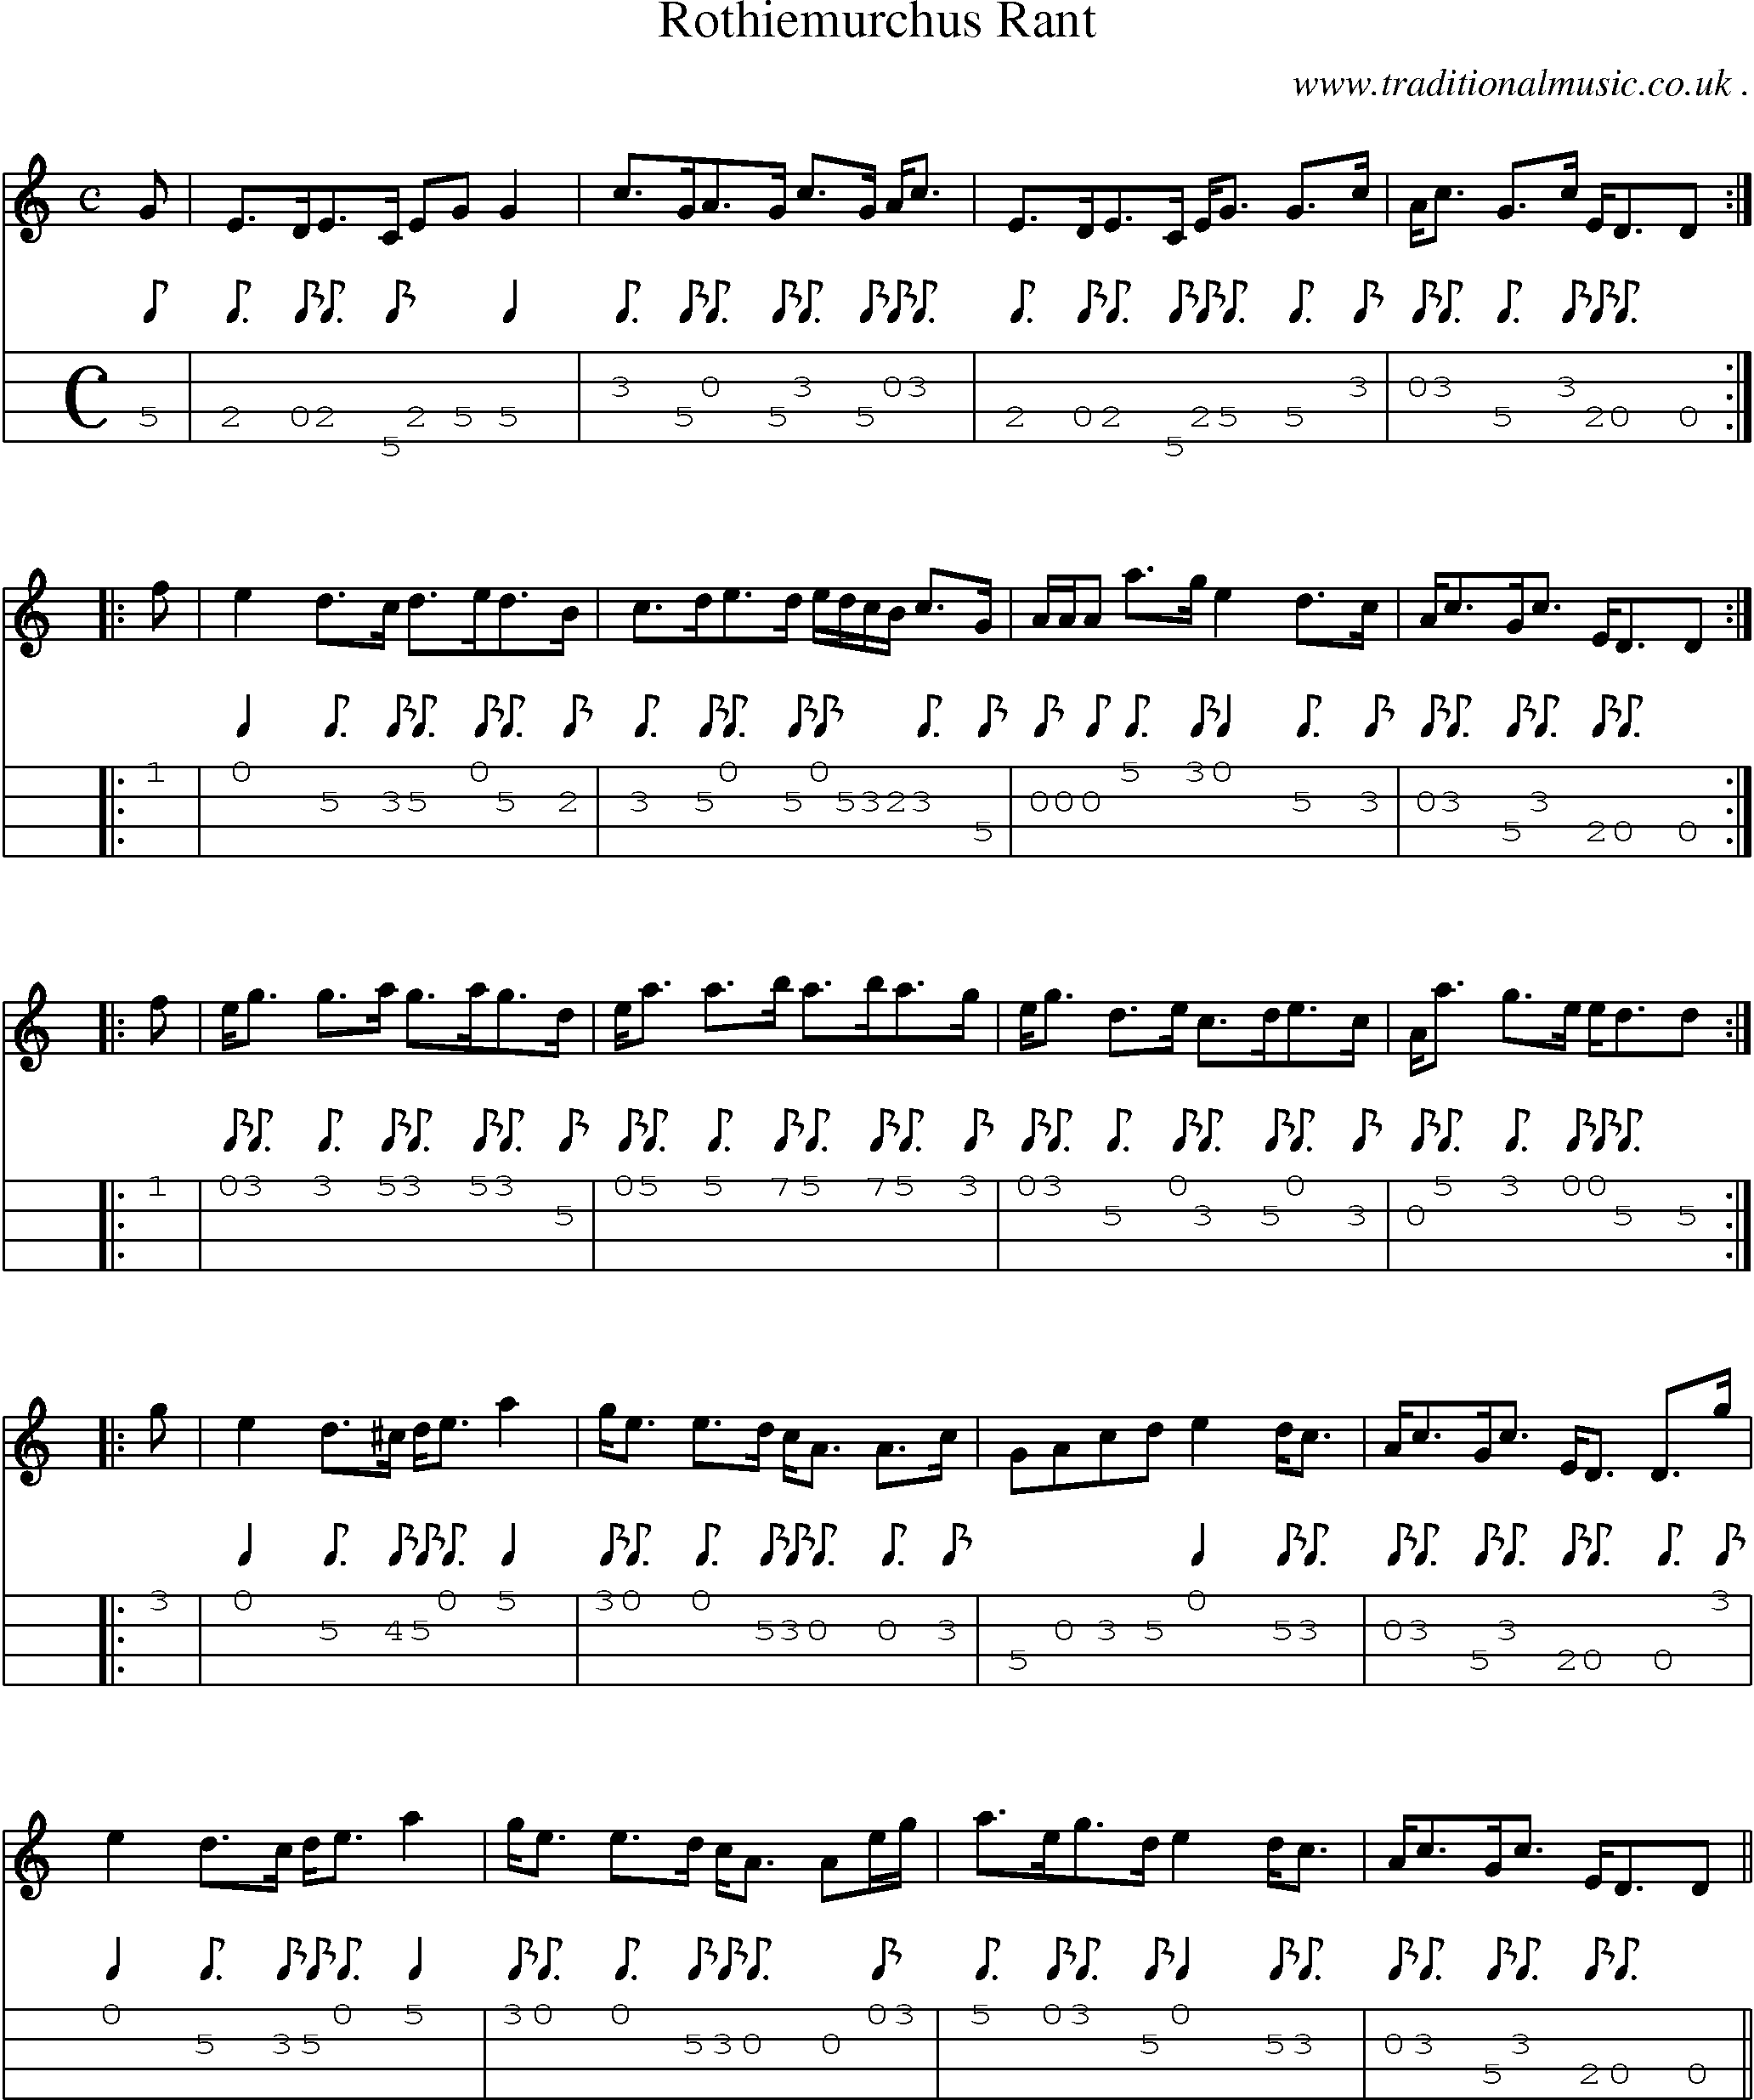 Sheet-music  score, Chords and Mandolin Tabs for Rothiemurchus Rant